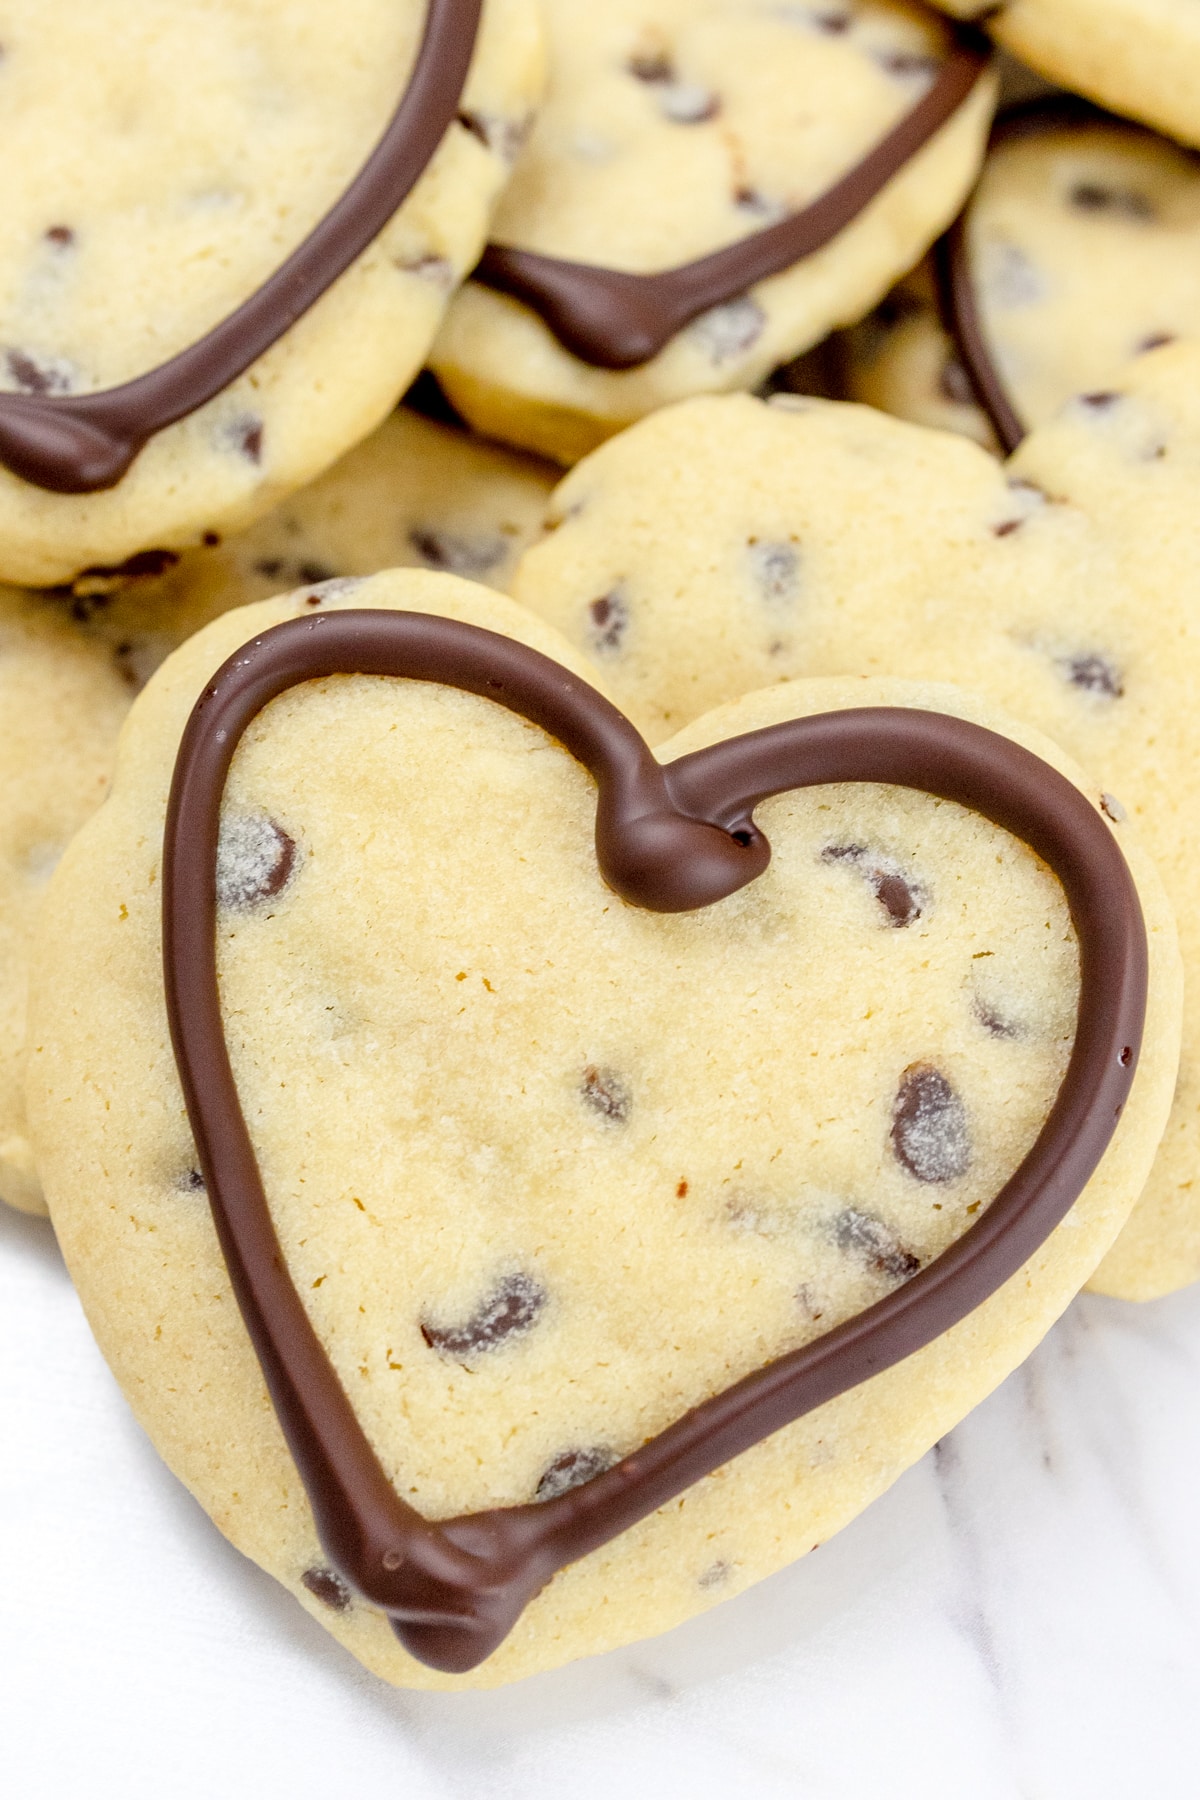 Top view of a chocolate chip cookies with melted chocolate hearts on them.